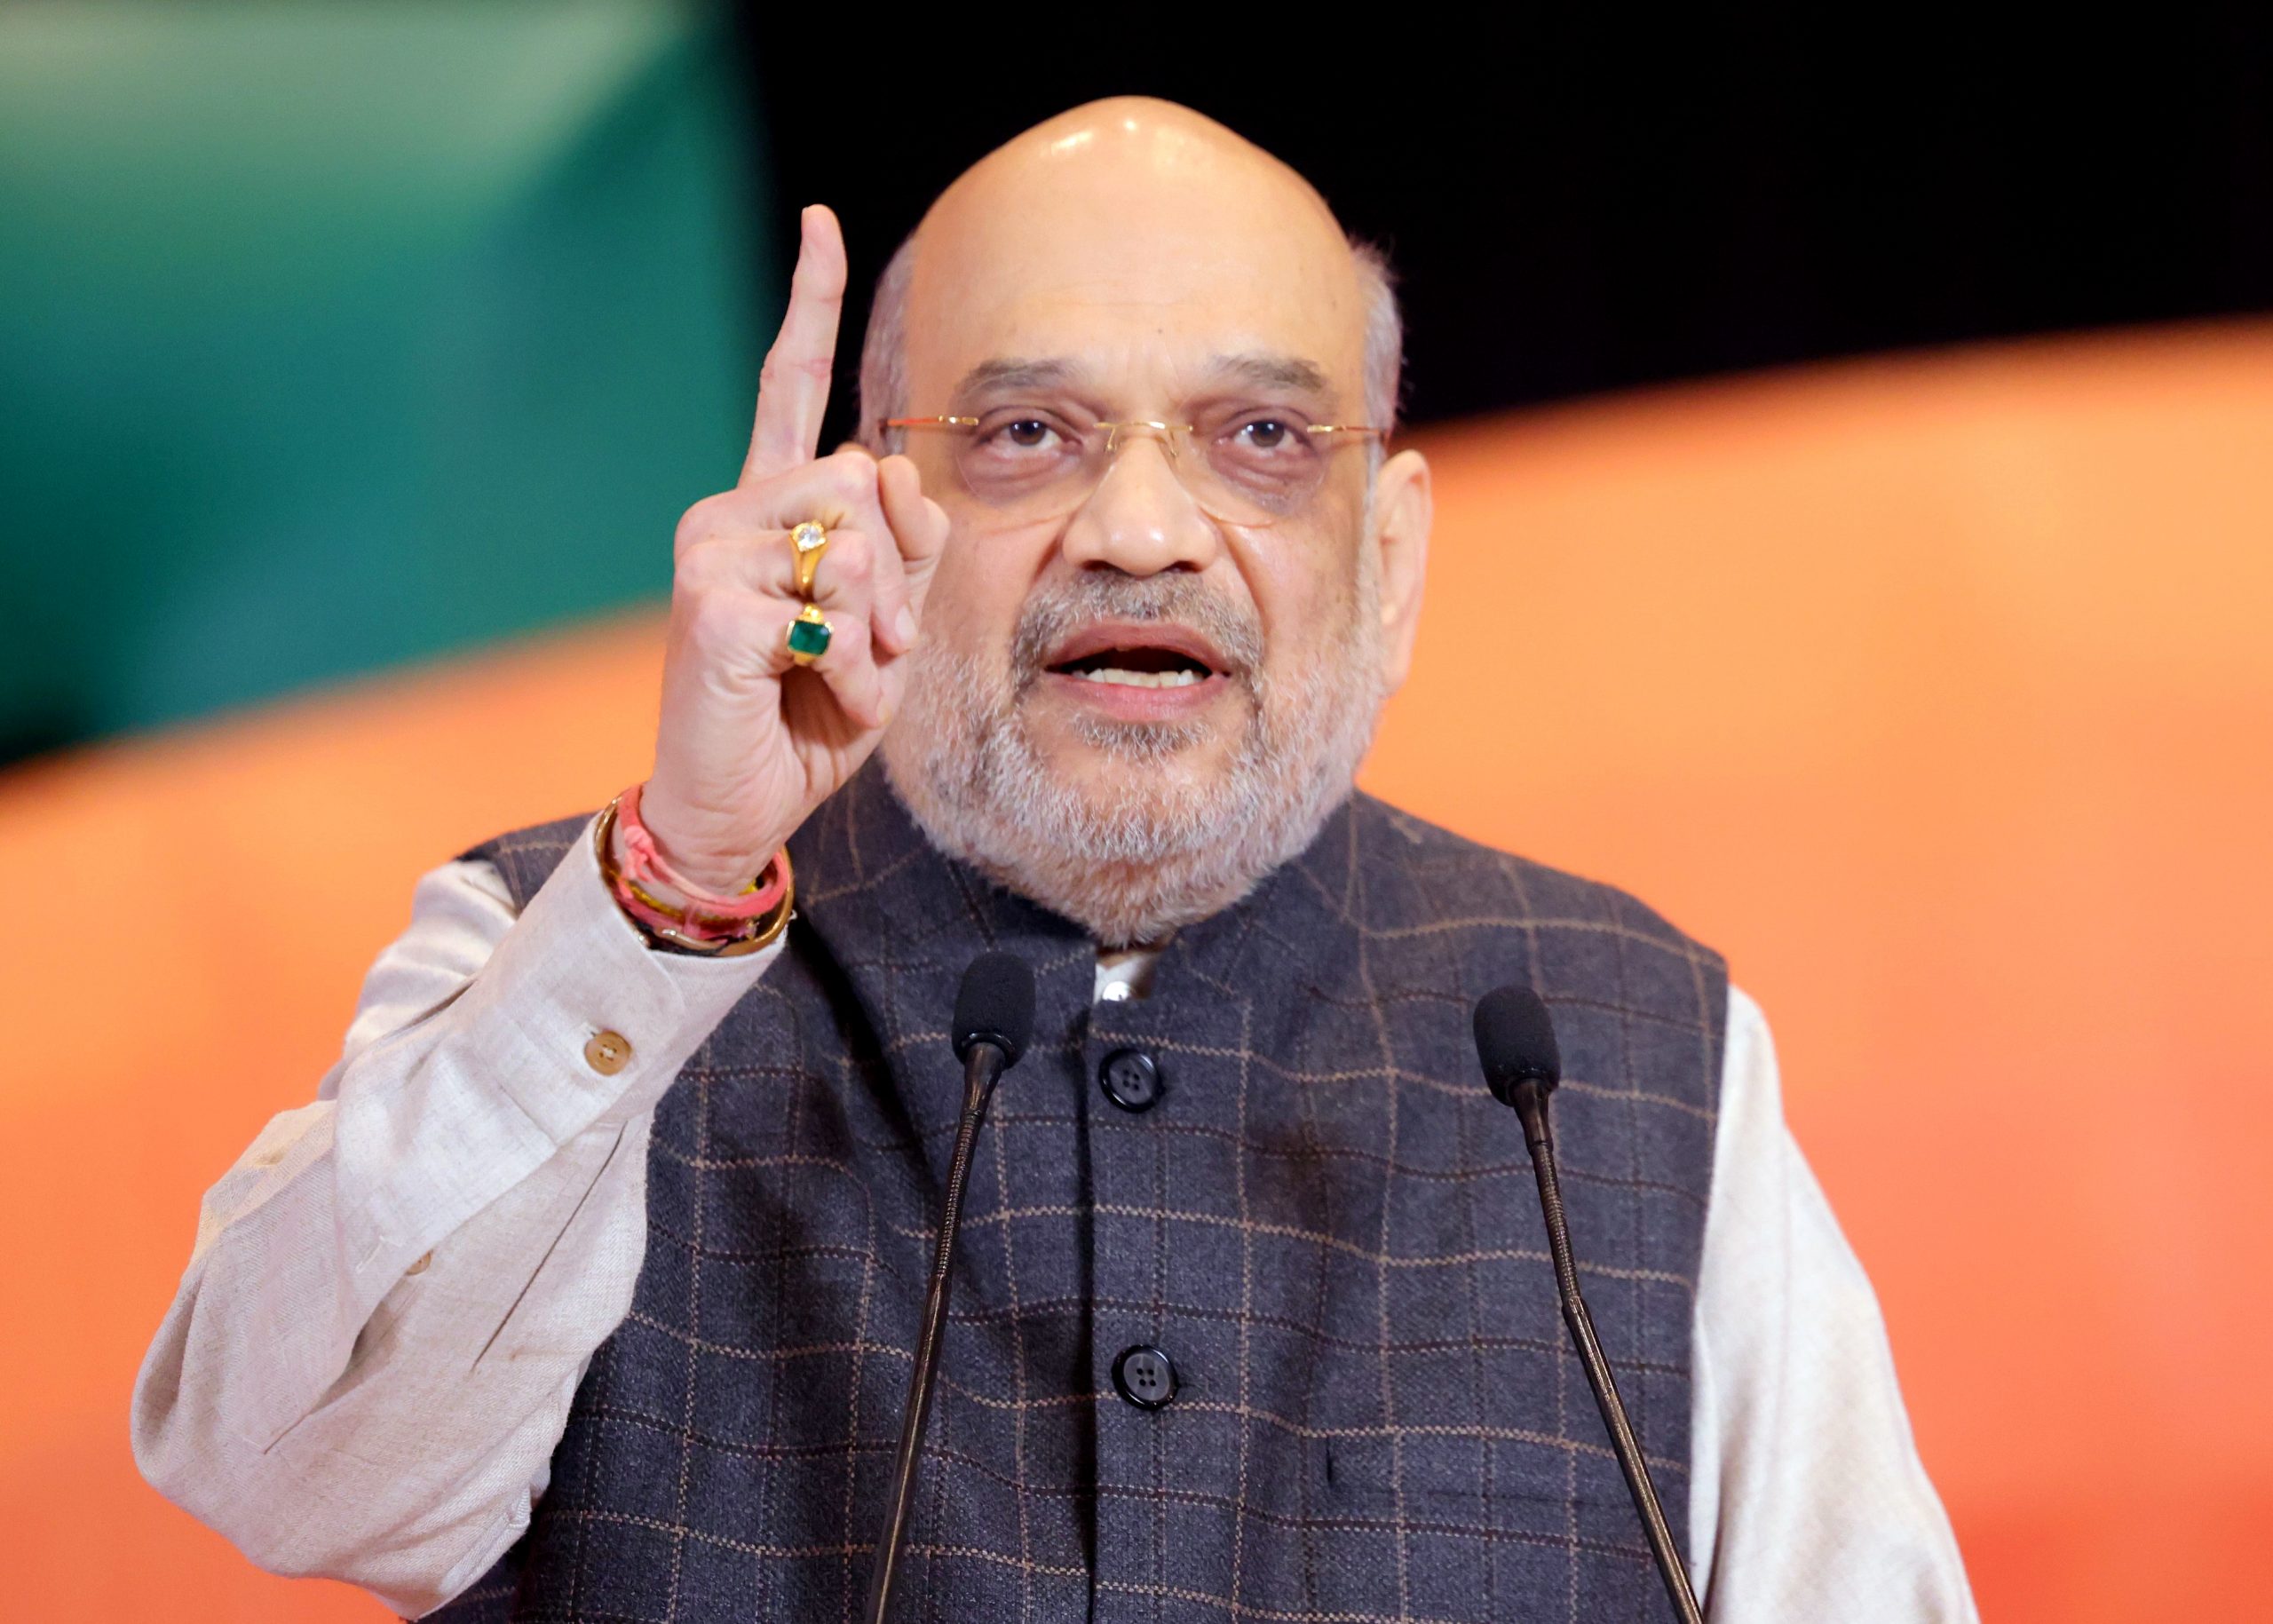 AFSPA revocation in J&K will be considered: Amit Shah